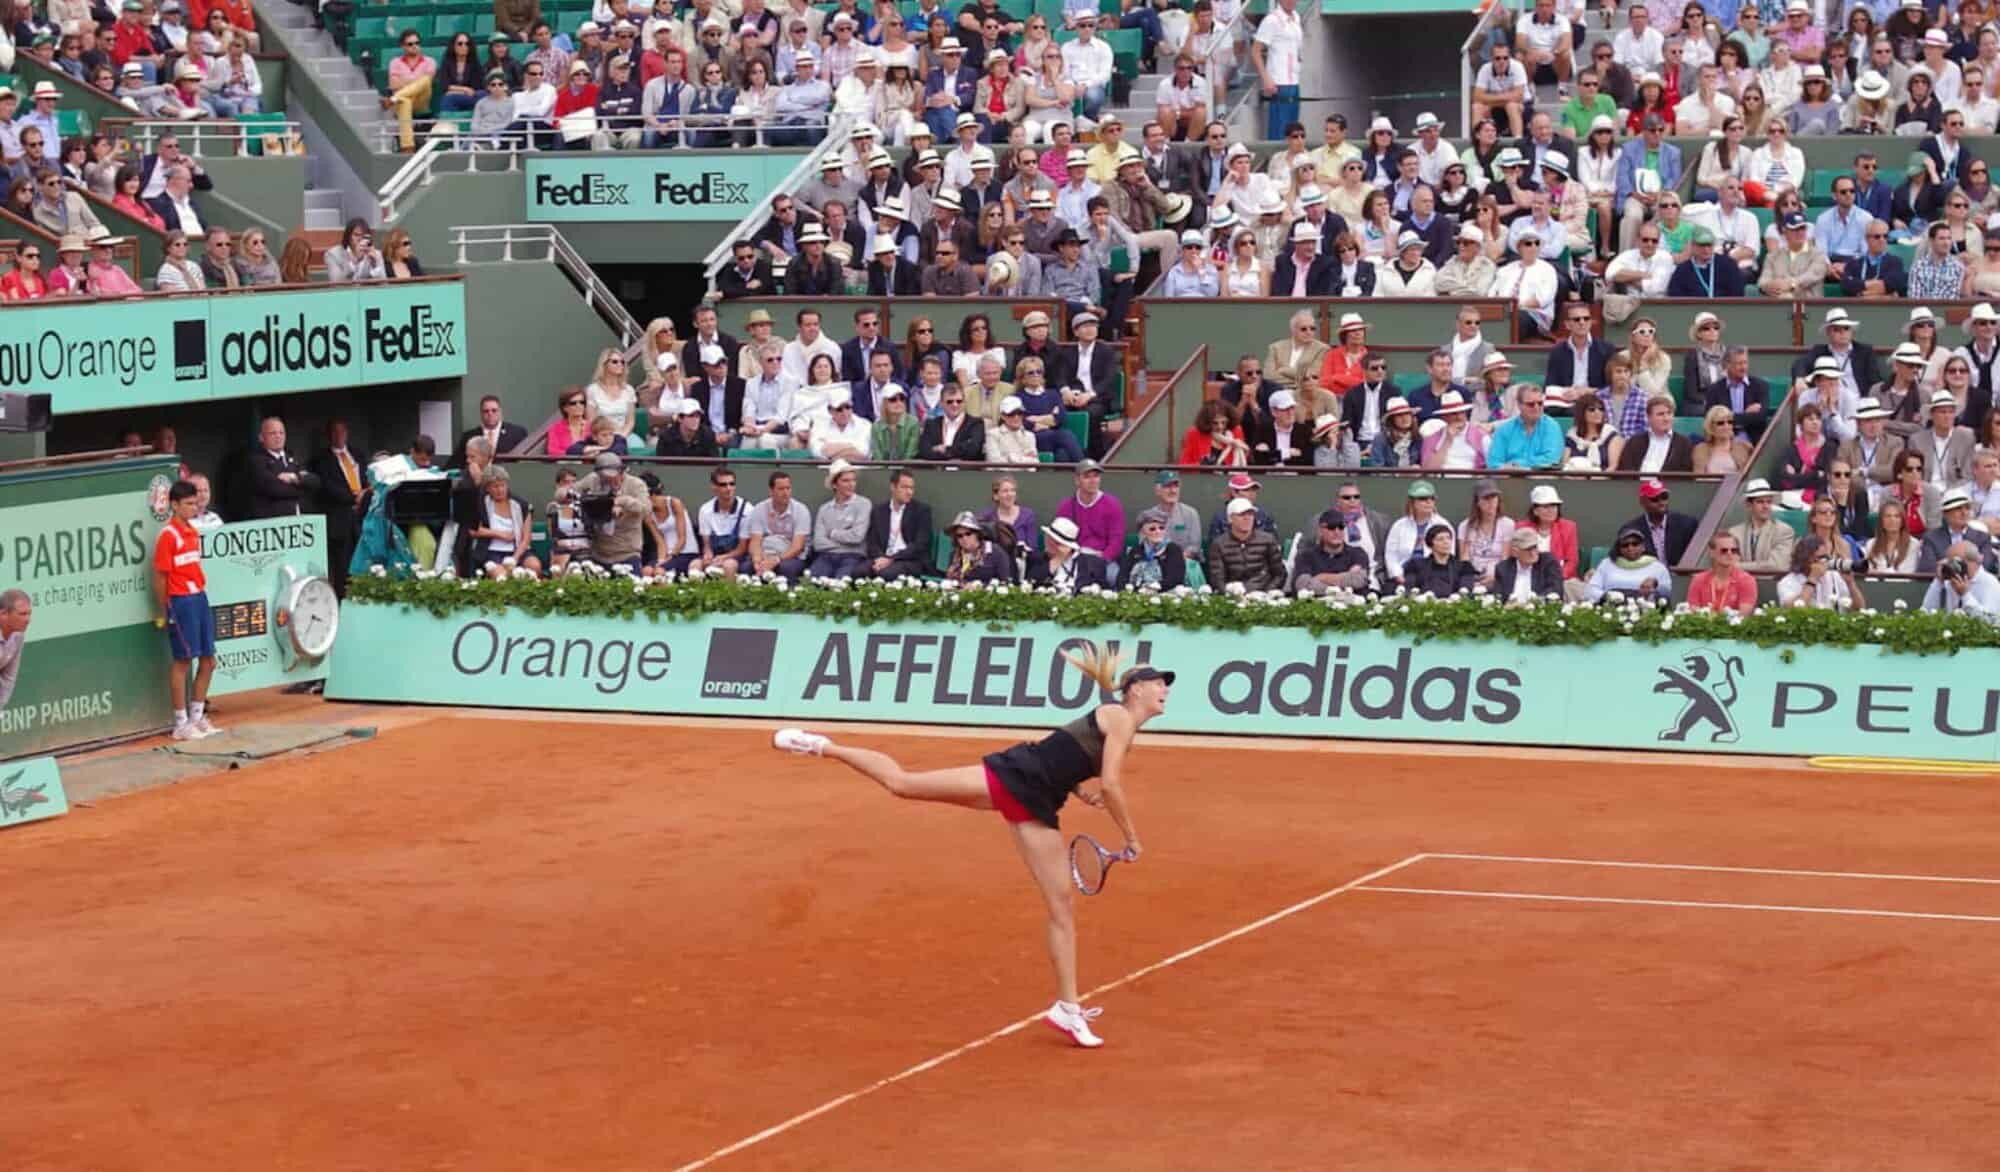 At this one match in Roland Garros or the French Open, a female tennis player serves in her black outfit as a crowd of spectators watch.